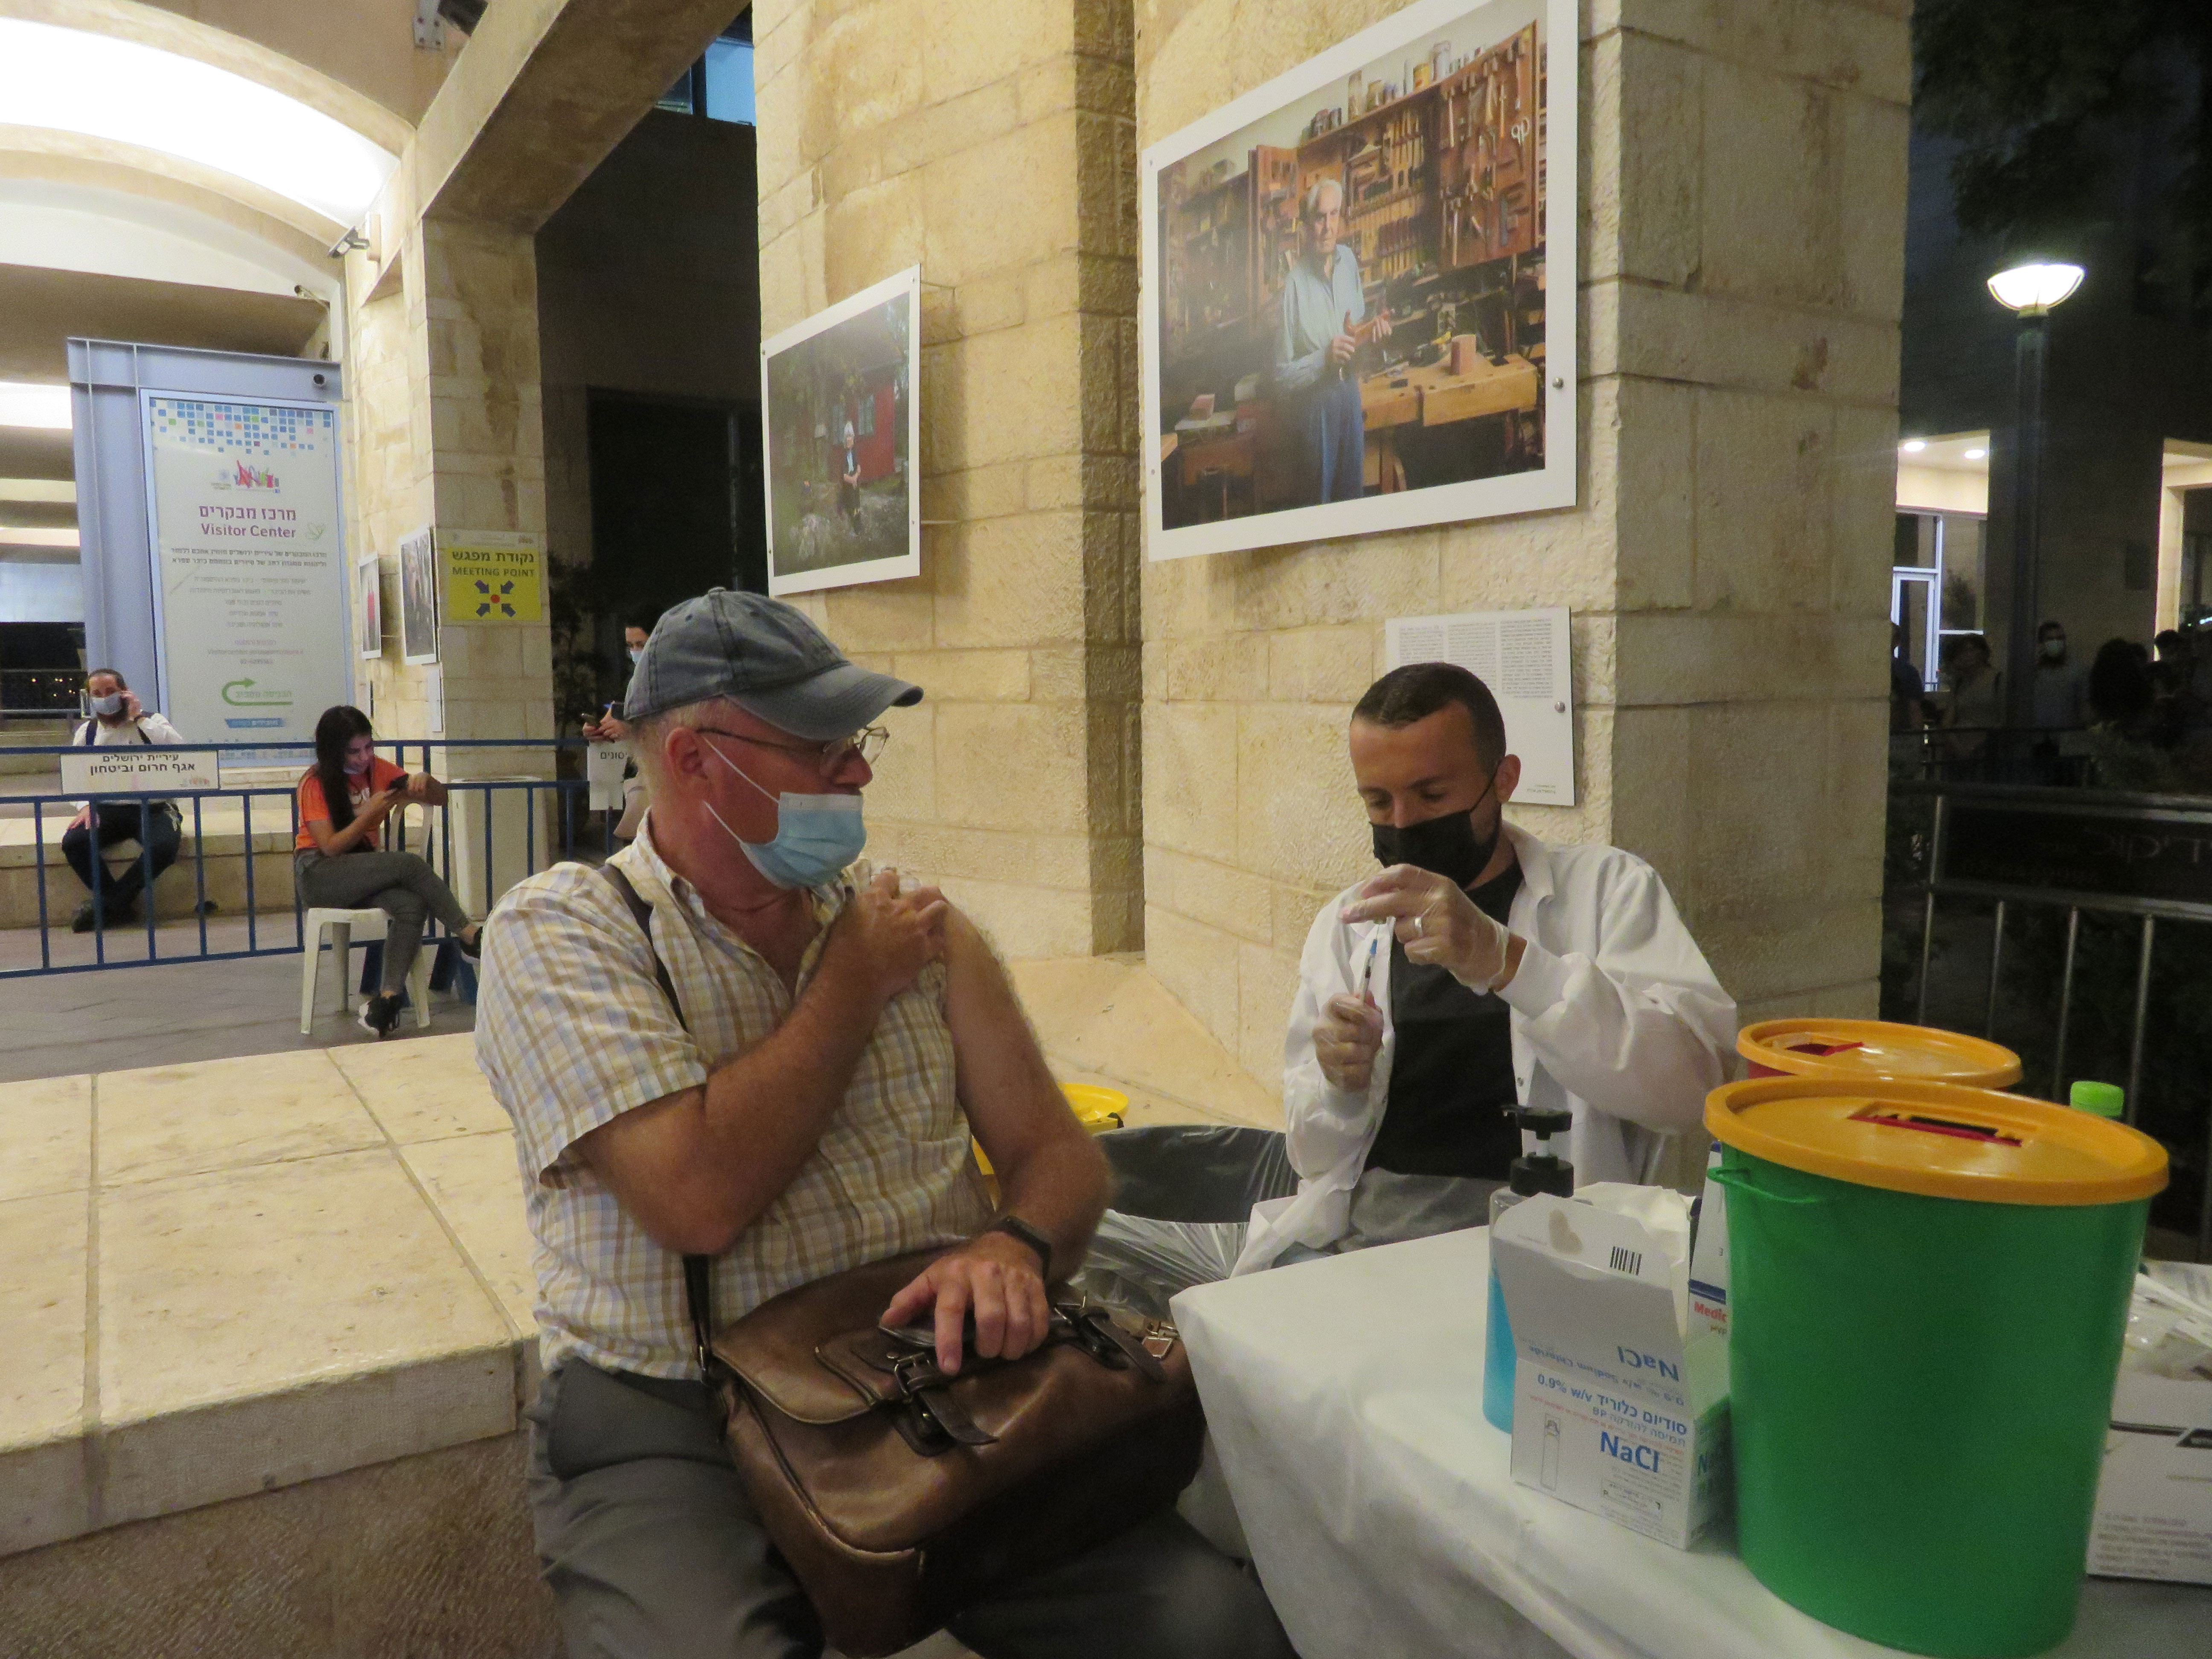 Doug receives the booster vaccine for COVID-19 at Safra Square in Jerusalem on August 29.